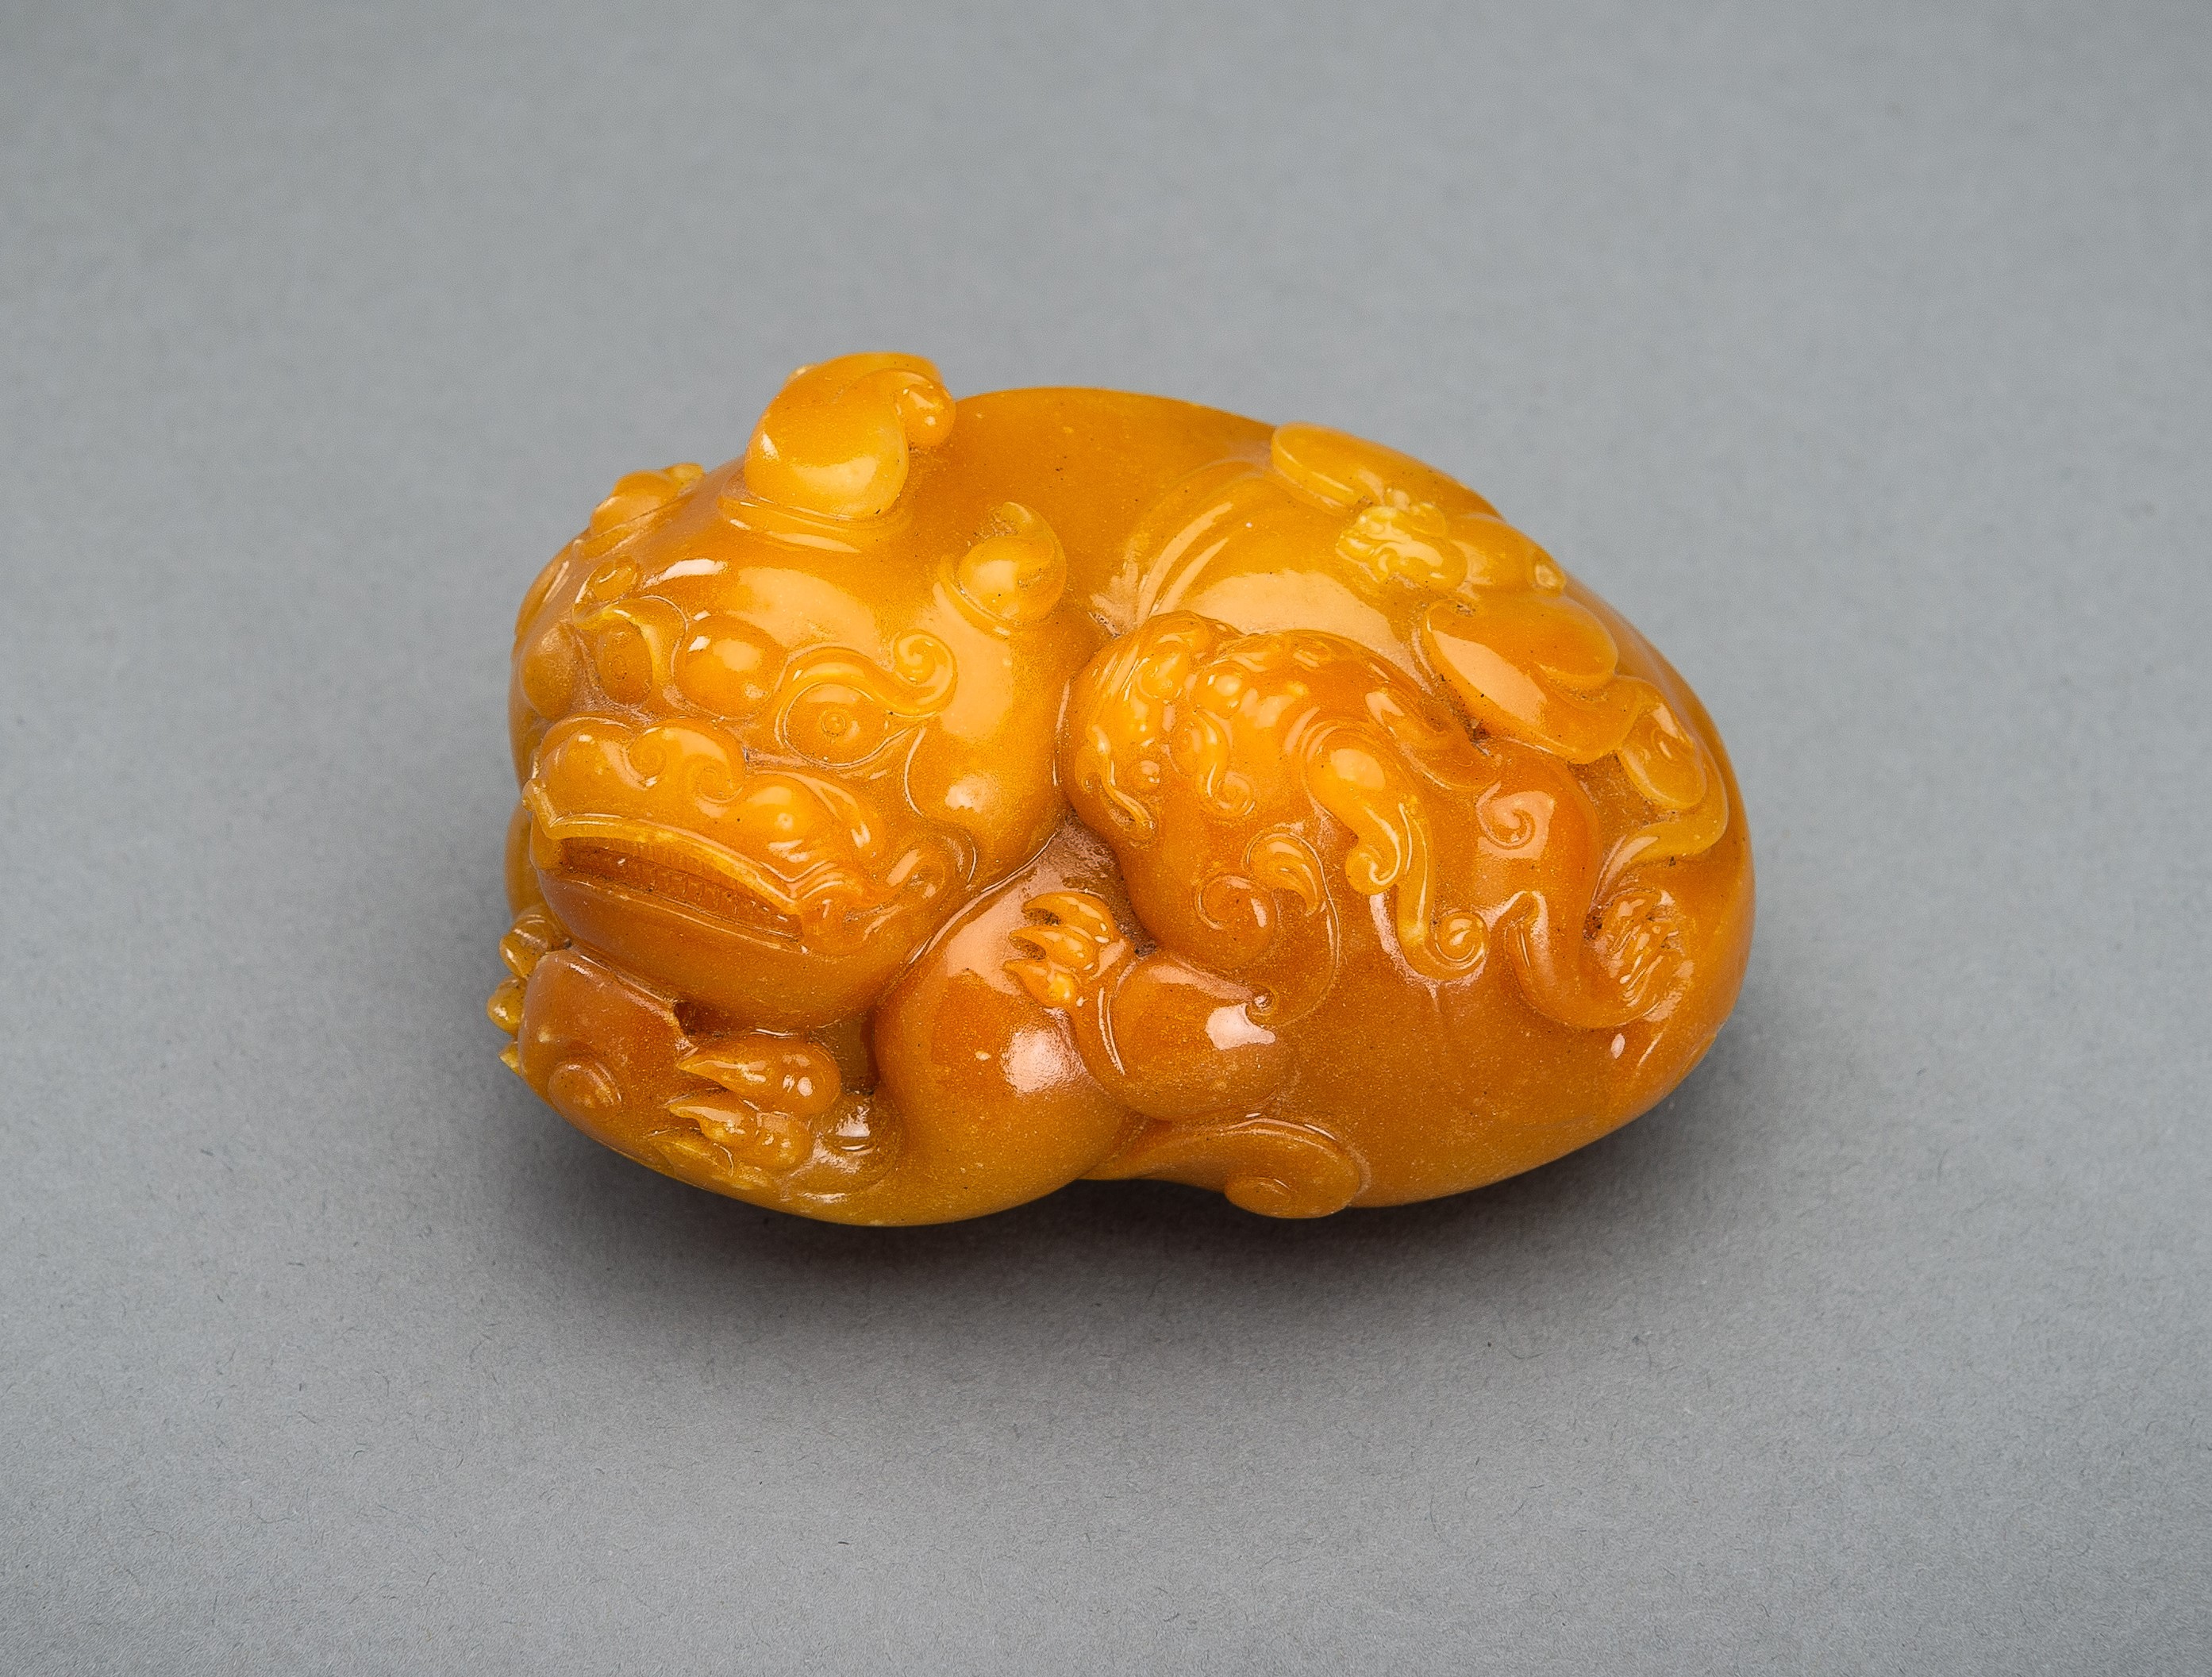 A 'TIANHUANG' GLASS FIGURE OF A BUDDHIST LION WITH CUB, c. 1920s